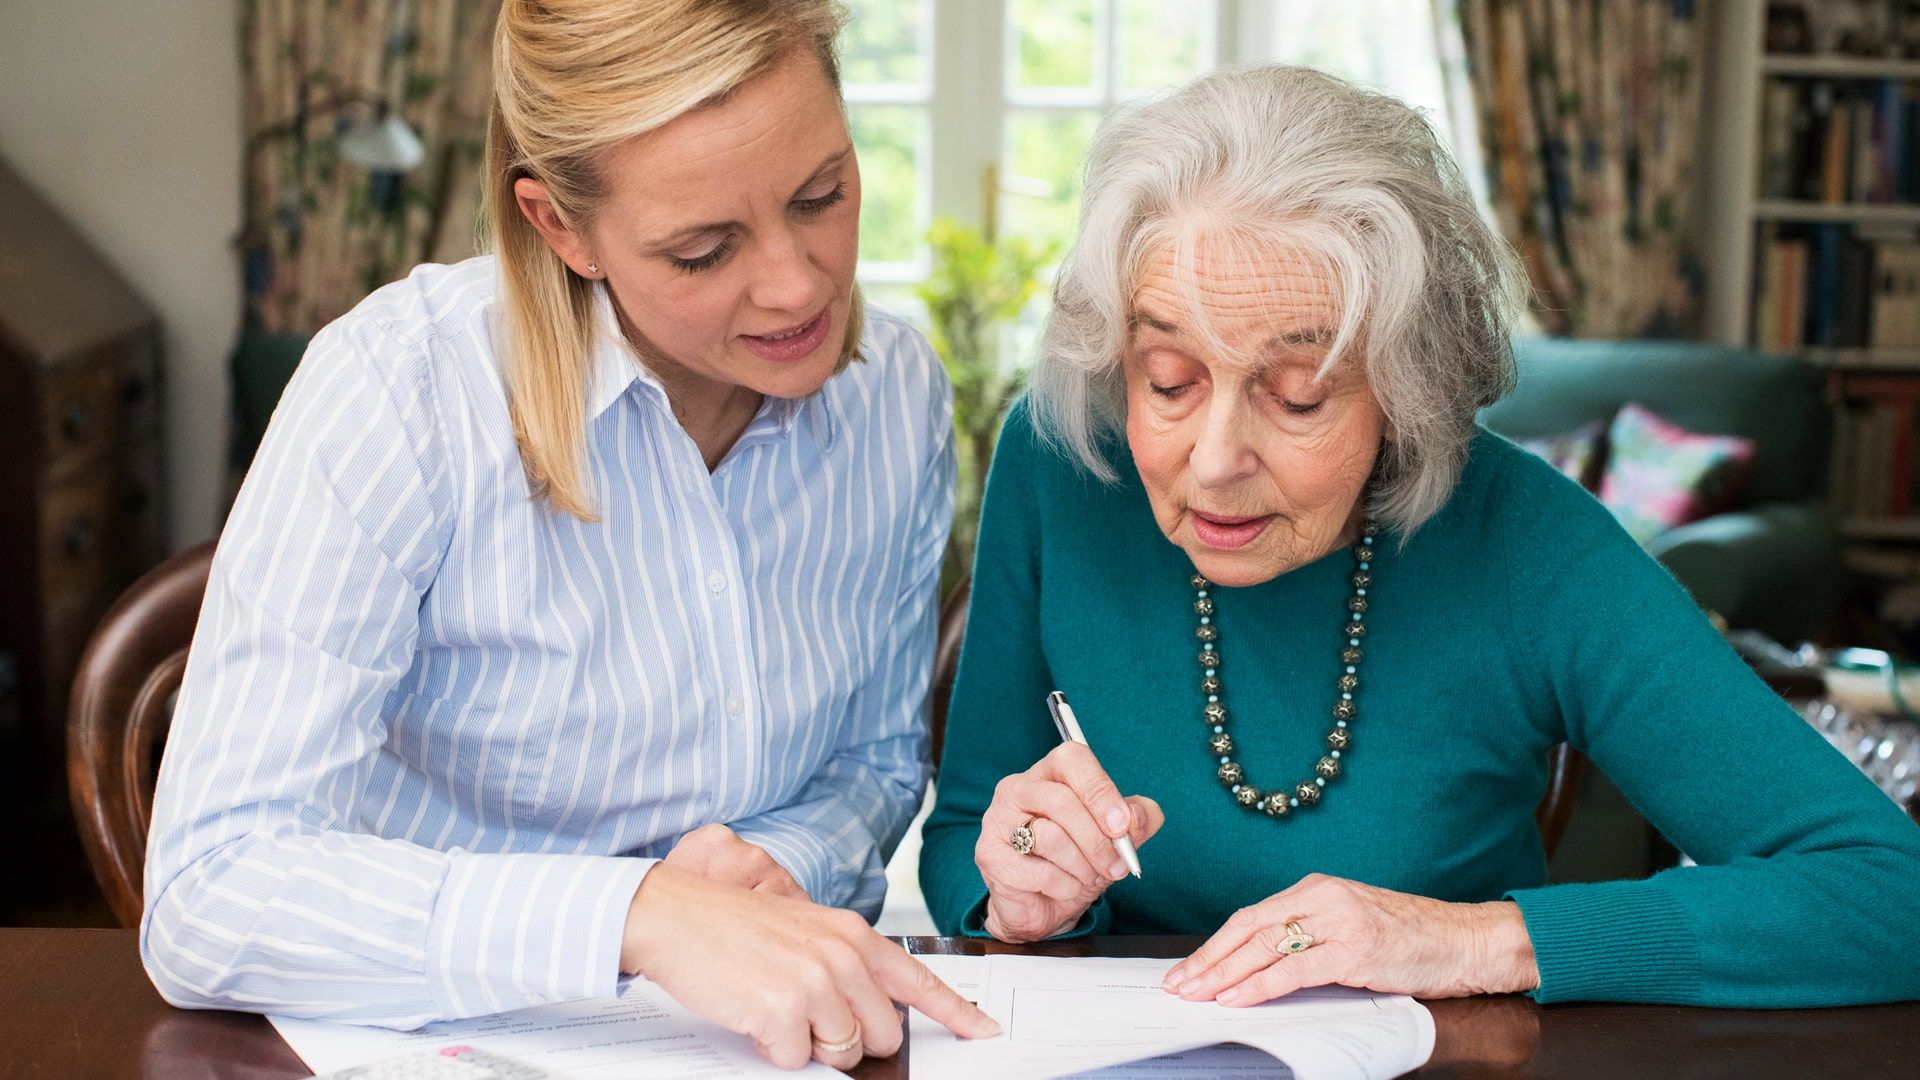 Older adult and adult daughter working together on power of attorney paperwork